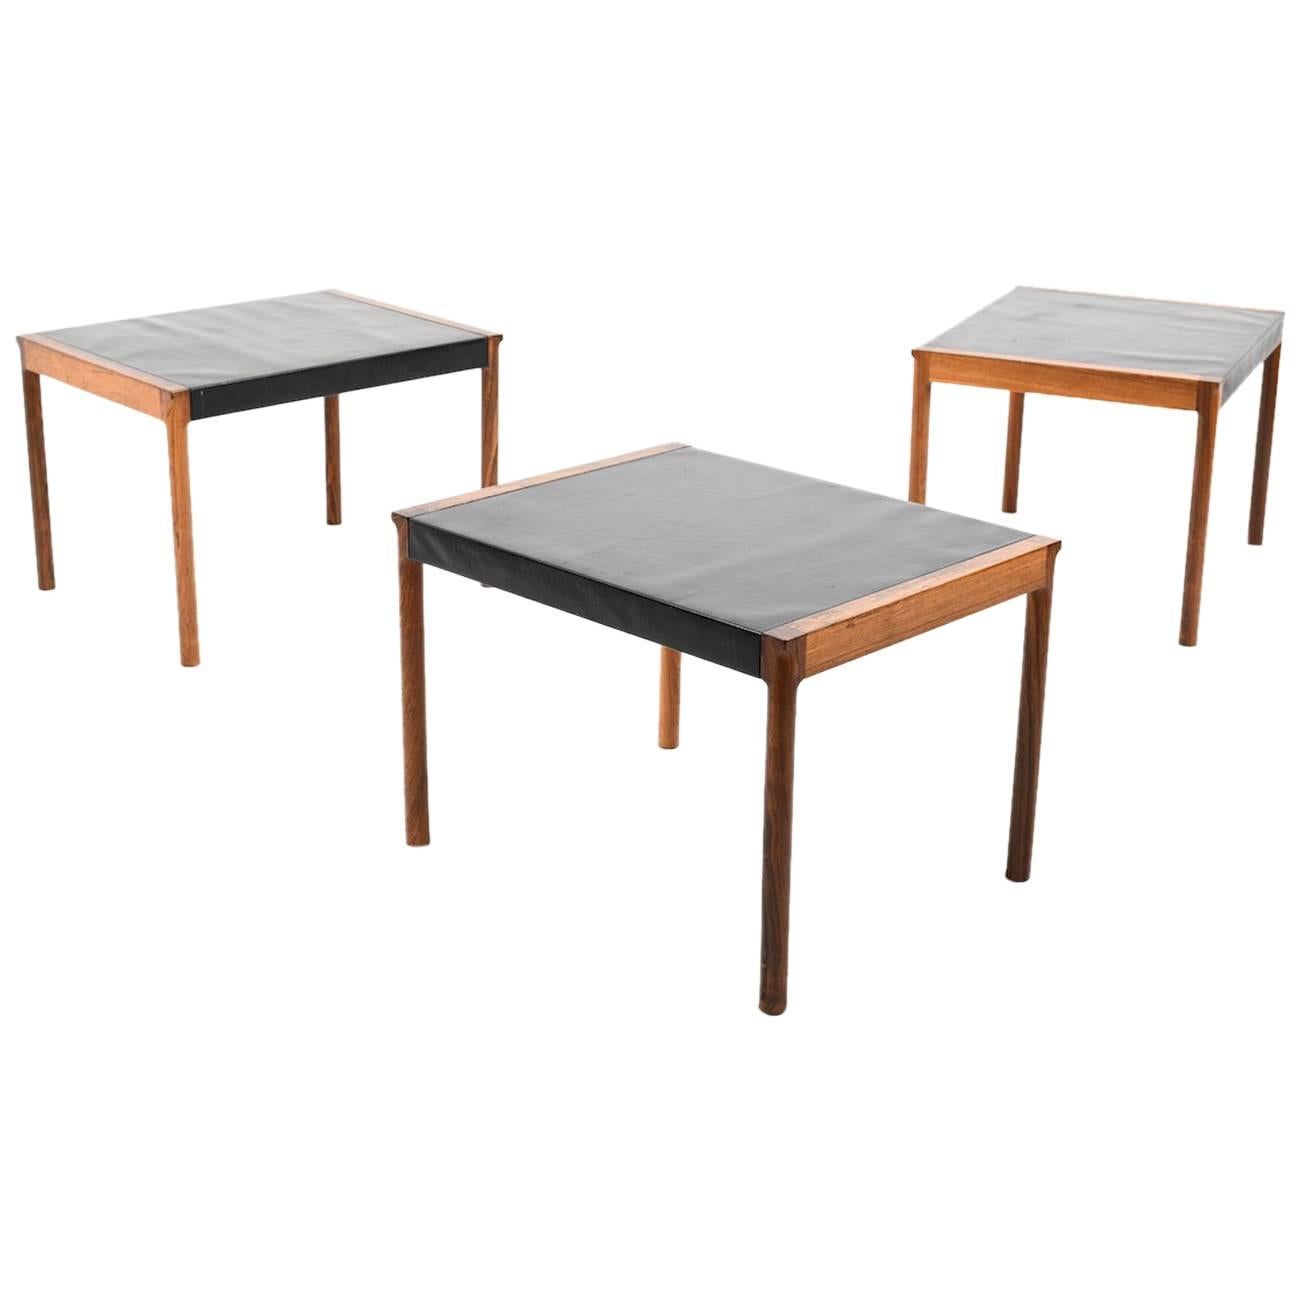 Three Variable Danish Sofa Tables in Rosewood, Made in Denmark Early 1960s For Sale